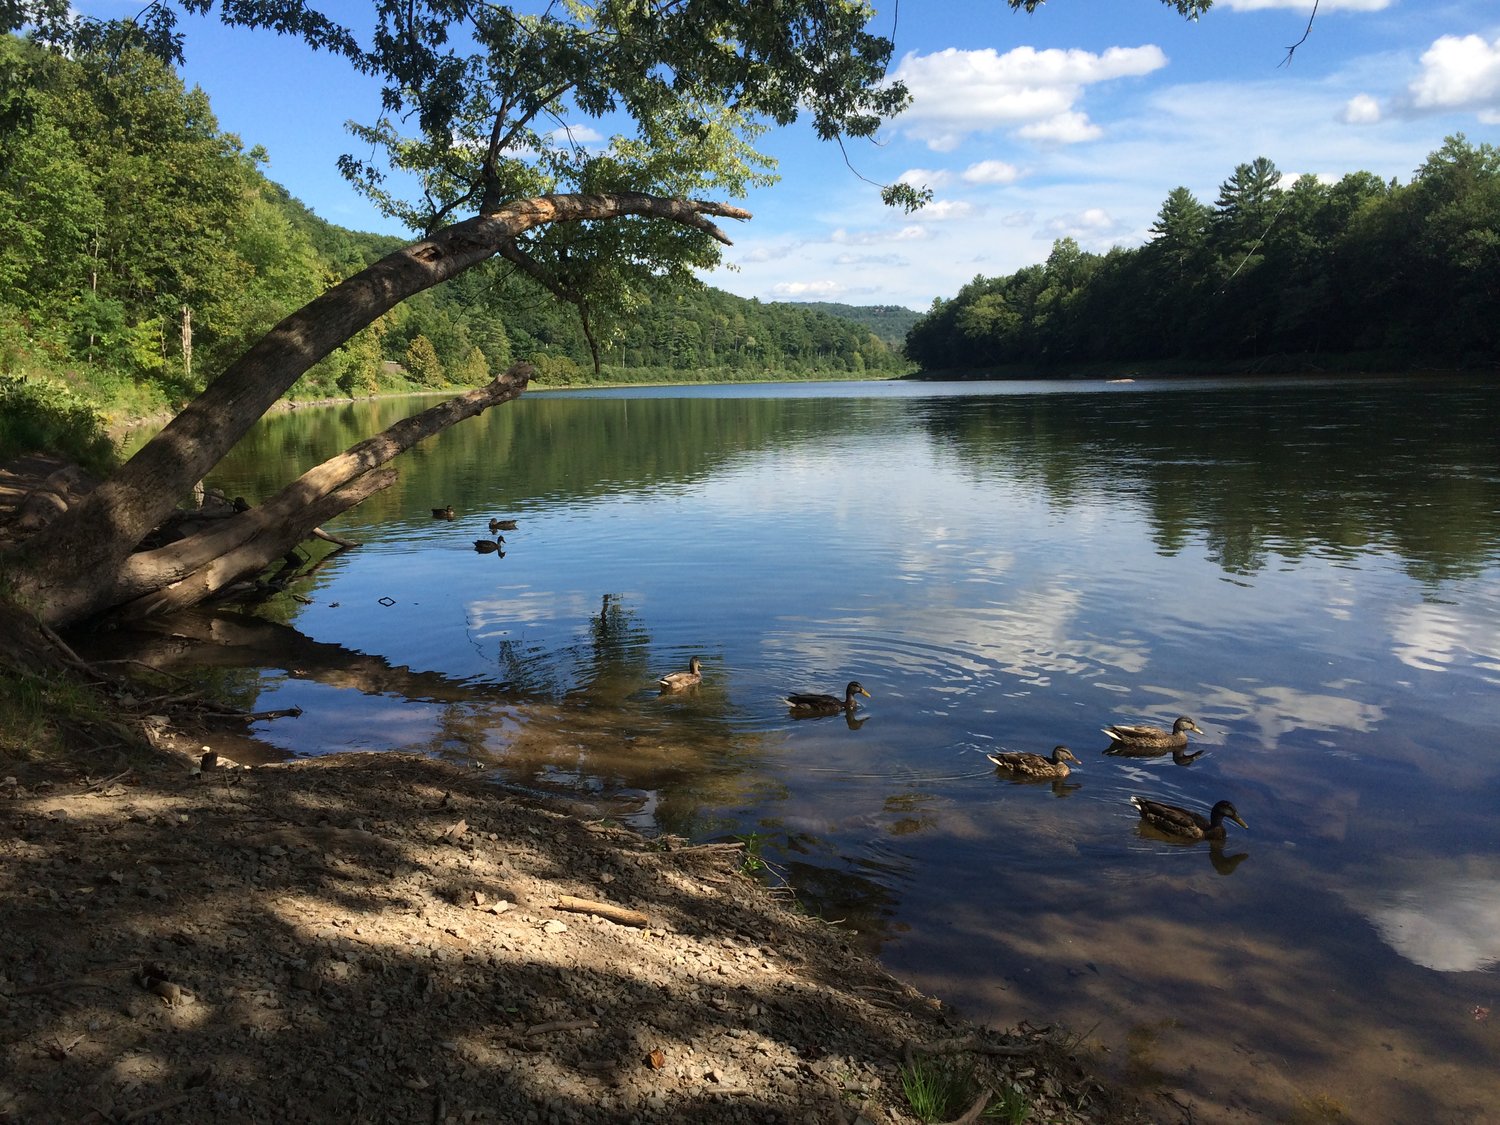 I’m #Grateful4theDelaware because it enlivens my senses and restores my spirit. The Delaware River has stirred stewardship, awakened activism and brought together individuals and communities over issues that, like the waterway itself, change over time.